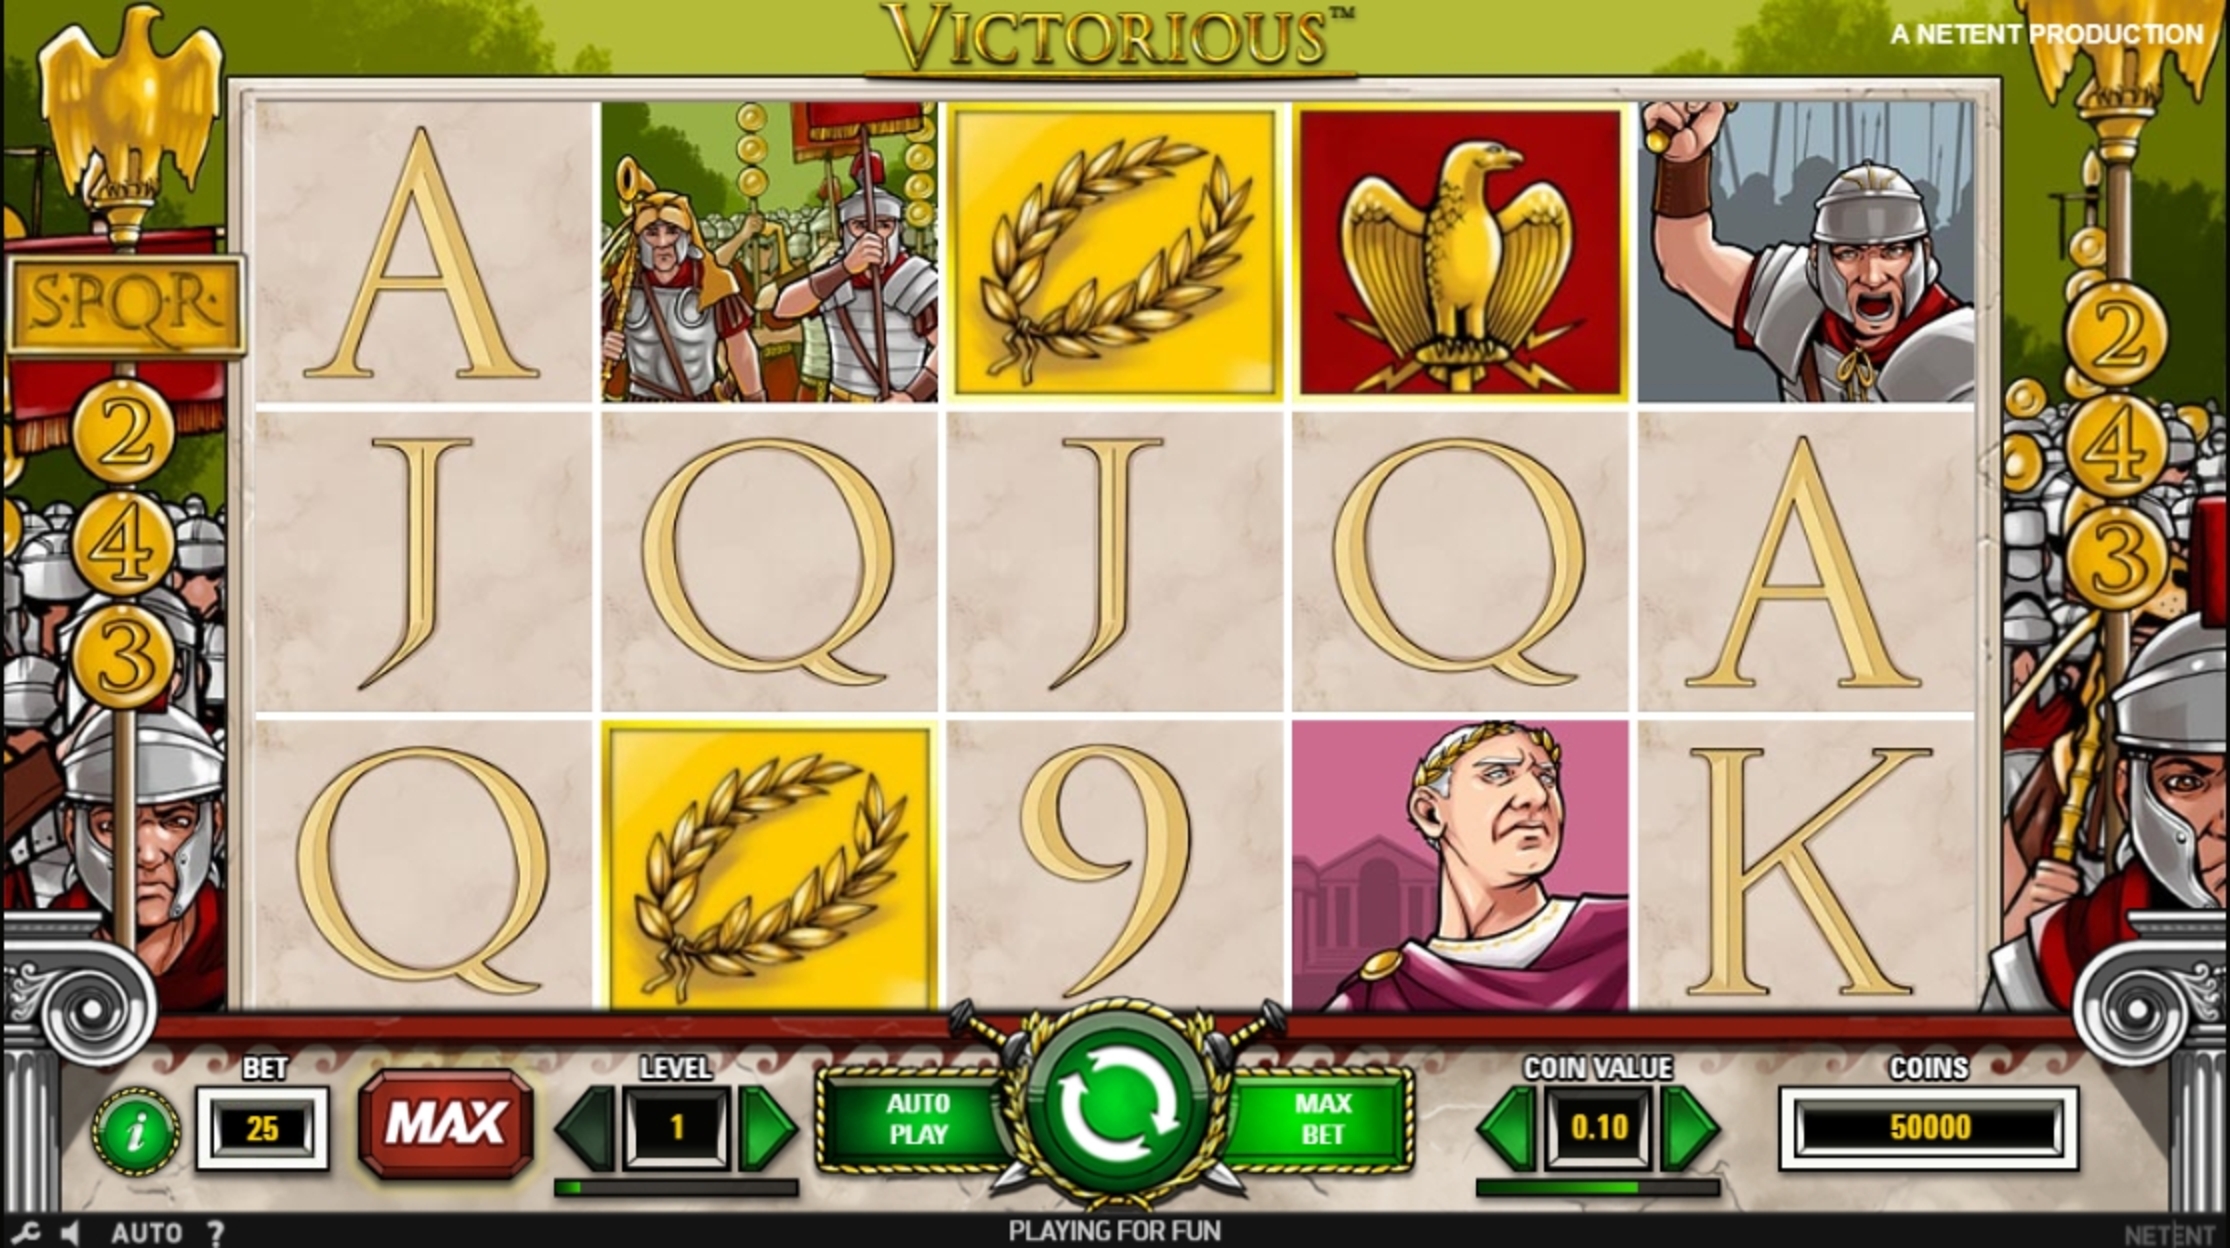 Reels in Victorious Slot Game by NetEnt